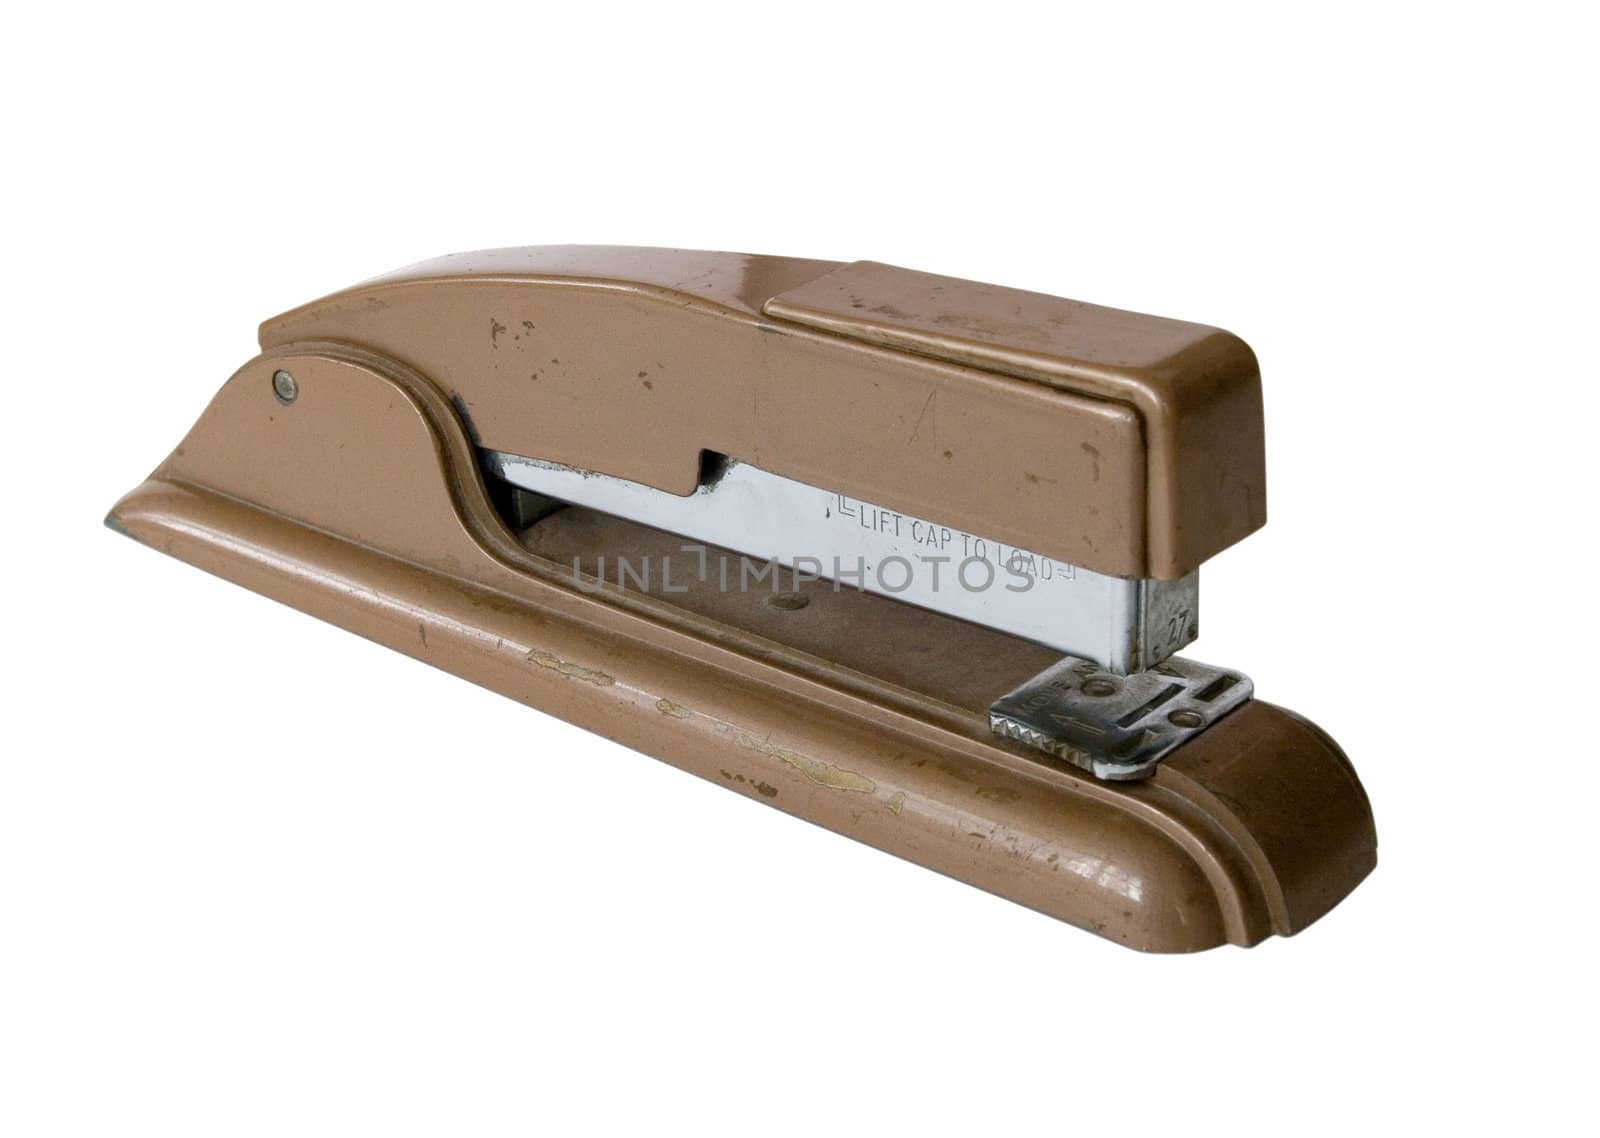 Old Stapler by daboost